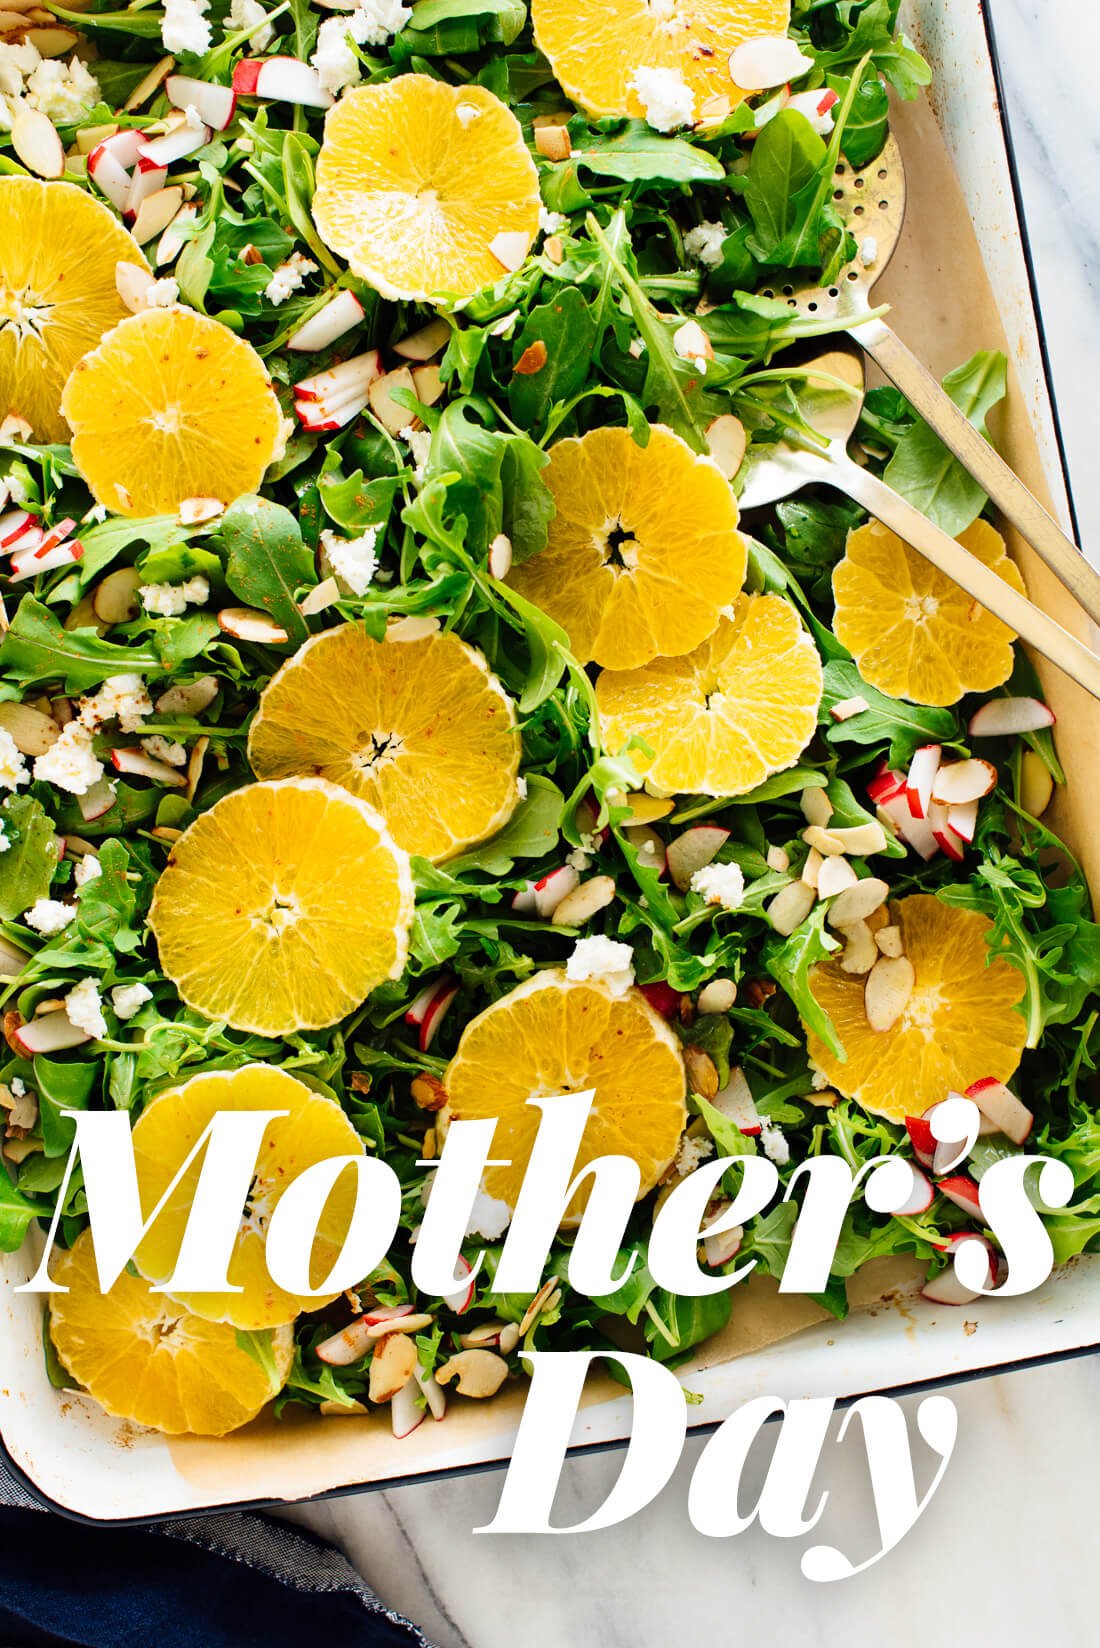 Find 25 fresh vegetarian recipes for Mother's Day, plus last-minute gift ideas from Cookie and Kate!